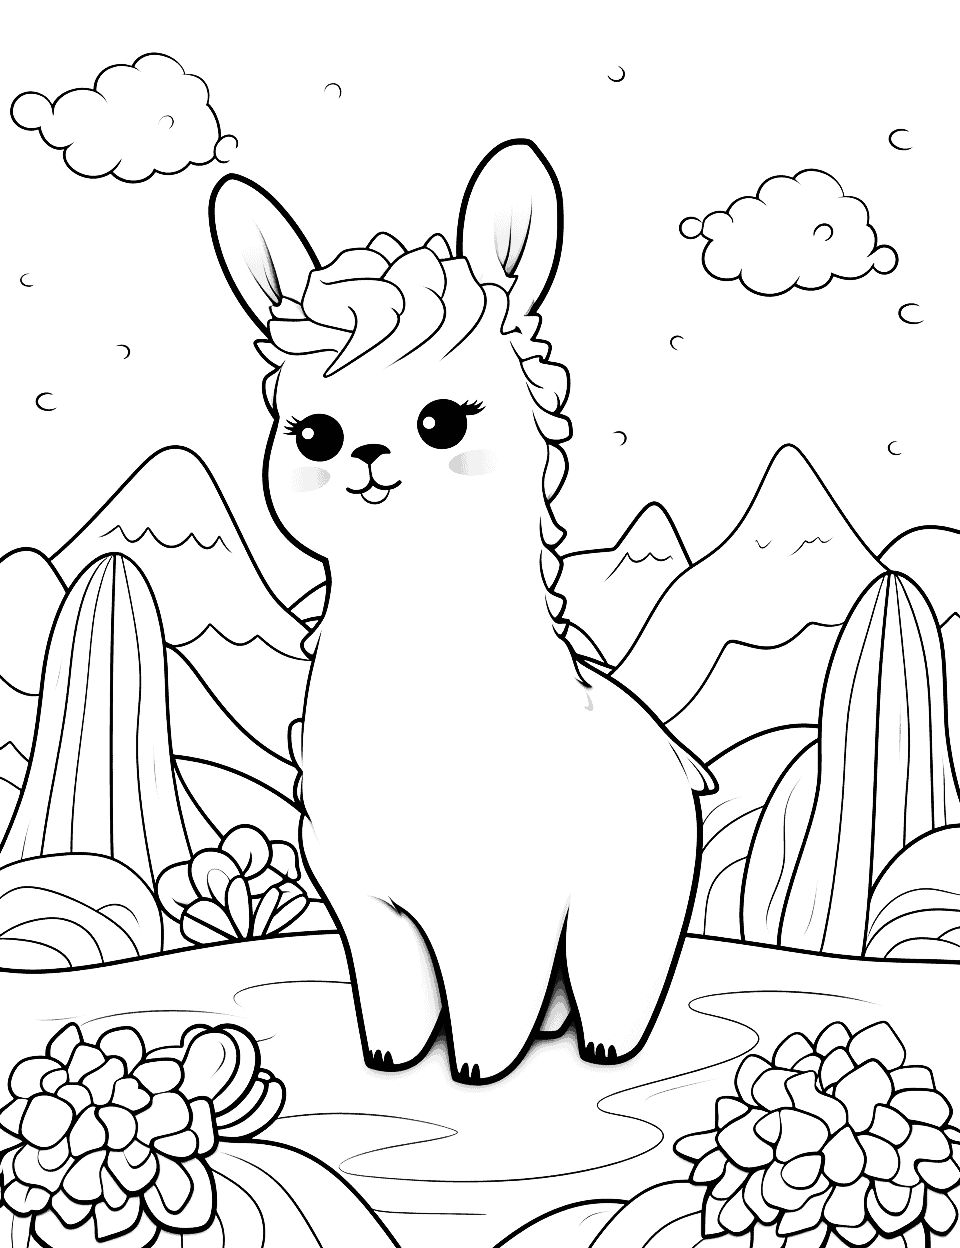 Friendly Llama's Mountain Adventure Kawaii Coloring Page - A cheerful llama in the mountain valleys, surrounded by colorful flora.